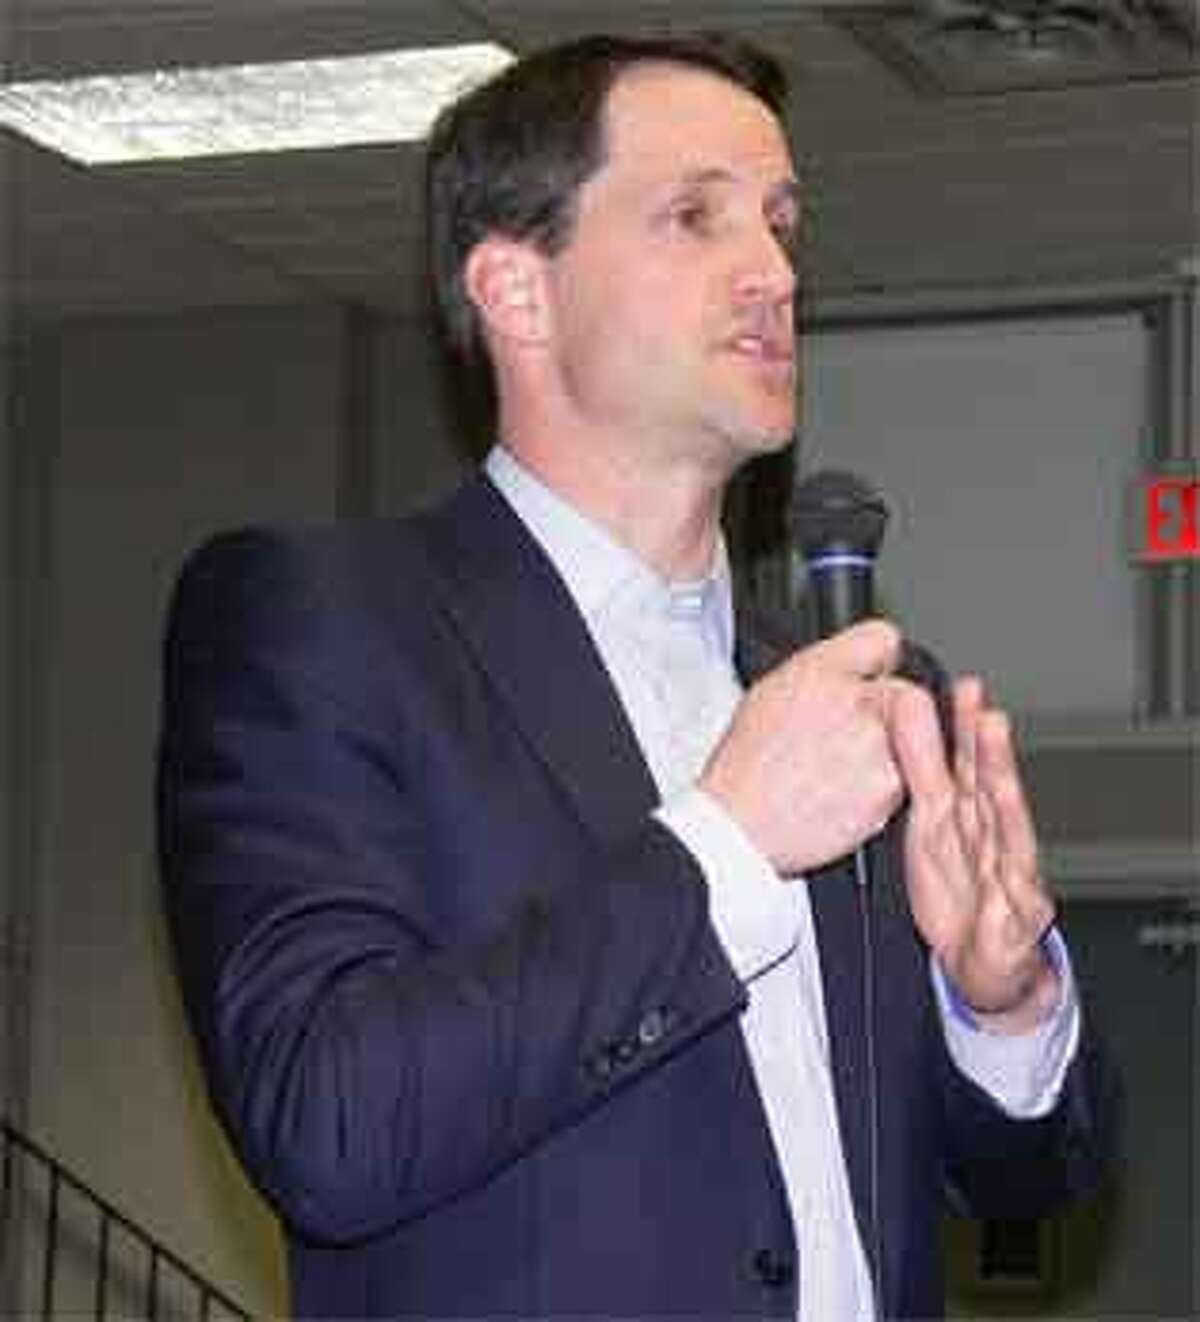 U.S. Rep. Jim Himes speaks to constituents at a town hall-style meeting at Shelton City Hall.